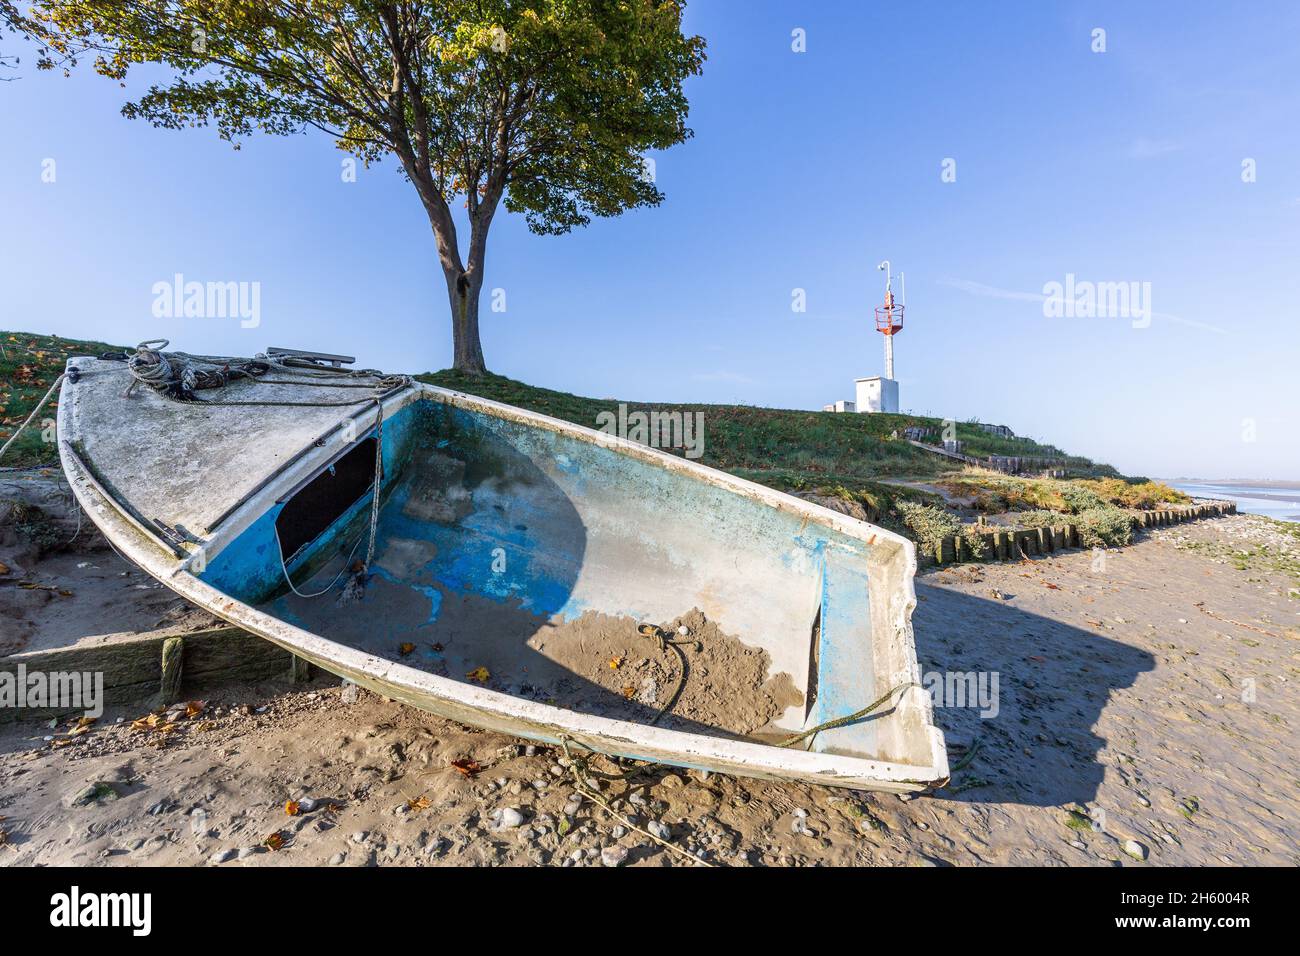 Rowboat moored on the jetty bordering the Somme river and its bay. Saint-Valery, Bay of Somme, France Stock Photo